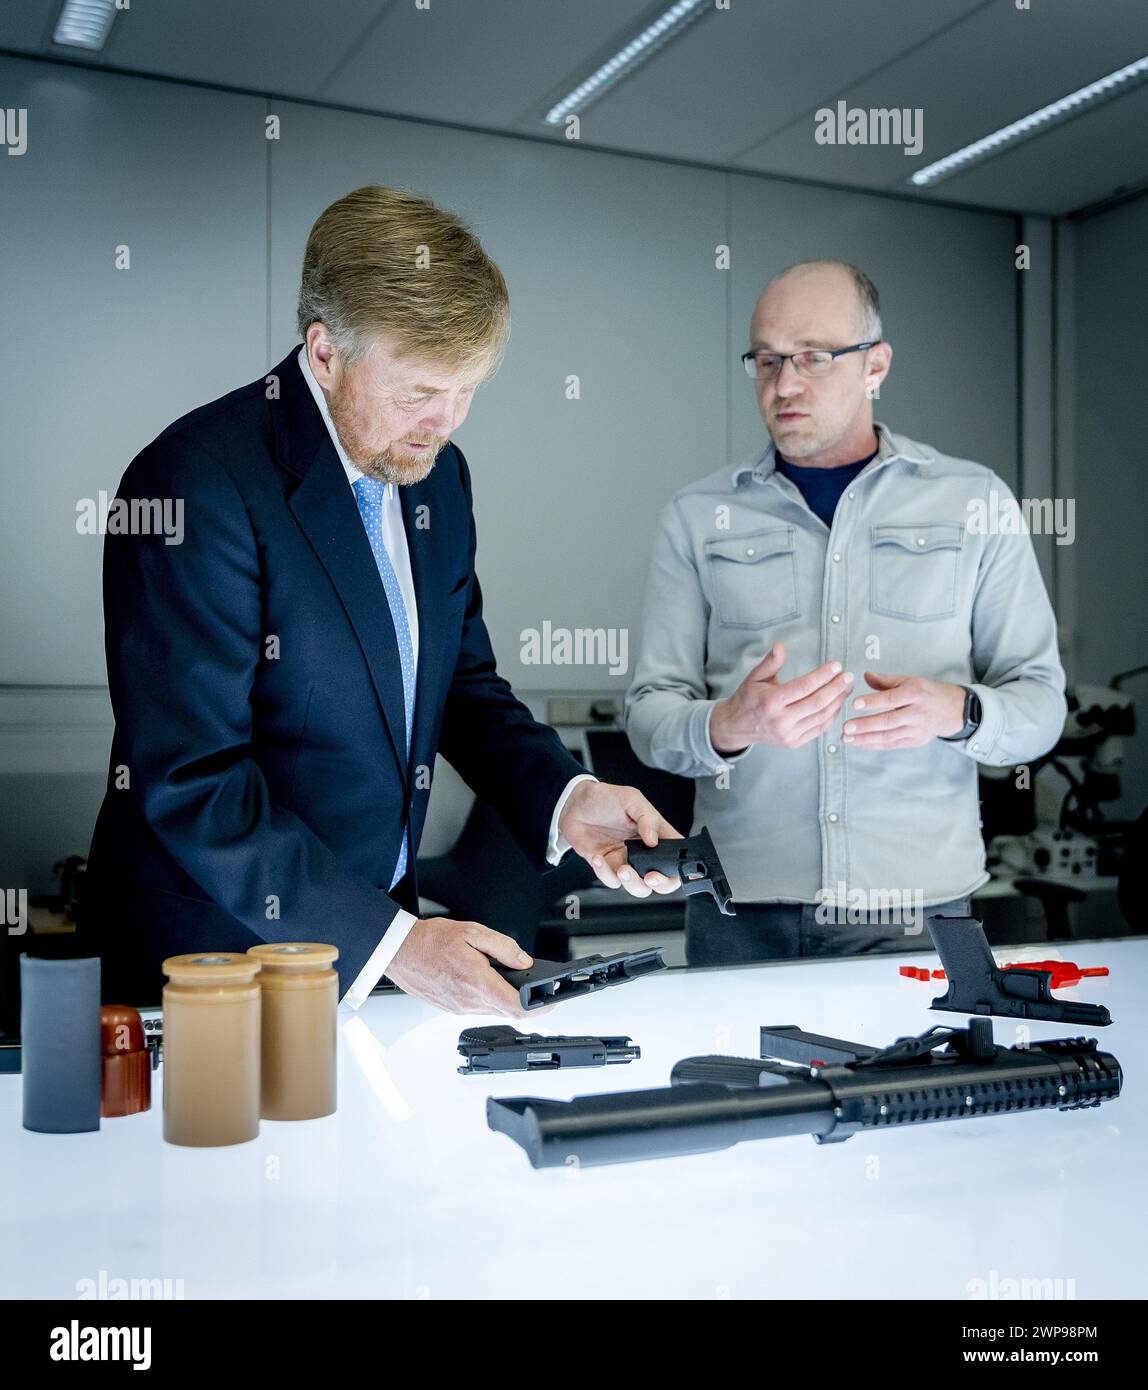 THE HAGUE - King Willem-Alexander during a working visit to the Netherlands Forensic Institute (NFI), where various departments are visited on the basis of a fictitious murder case. This year marks twenty-five years since the Forensic Laboratory and the Laboratory for Forensic Pathology merged into the NFI. ANP REMKO DE WAAL netherlands out - belgium out Stock Photo